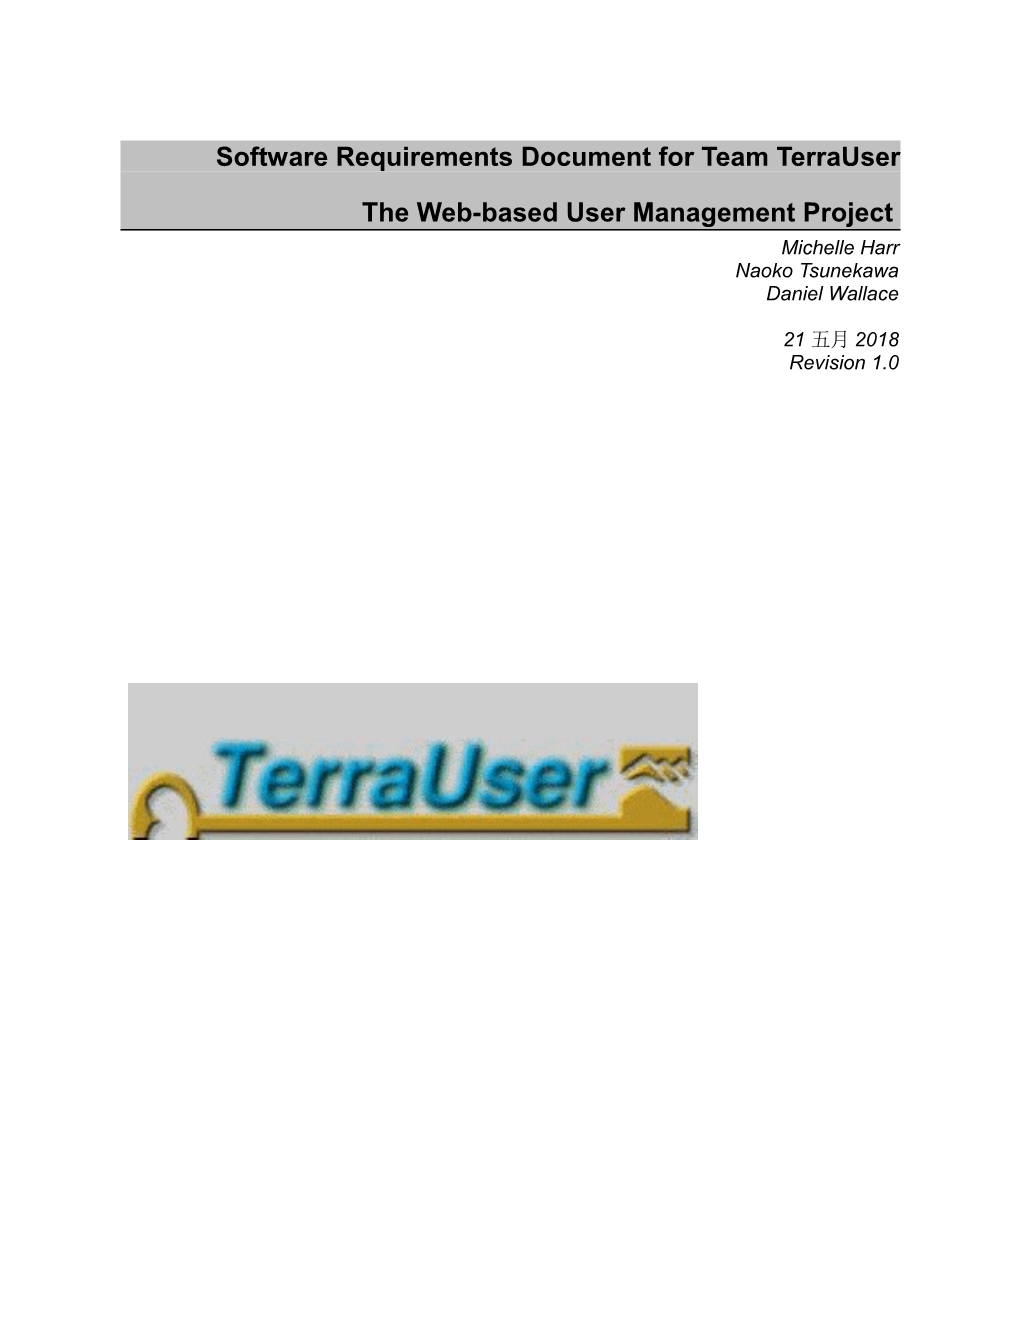 Software Requirements Document for Team Terrauser